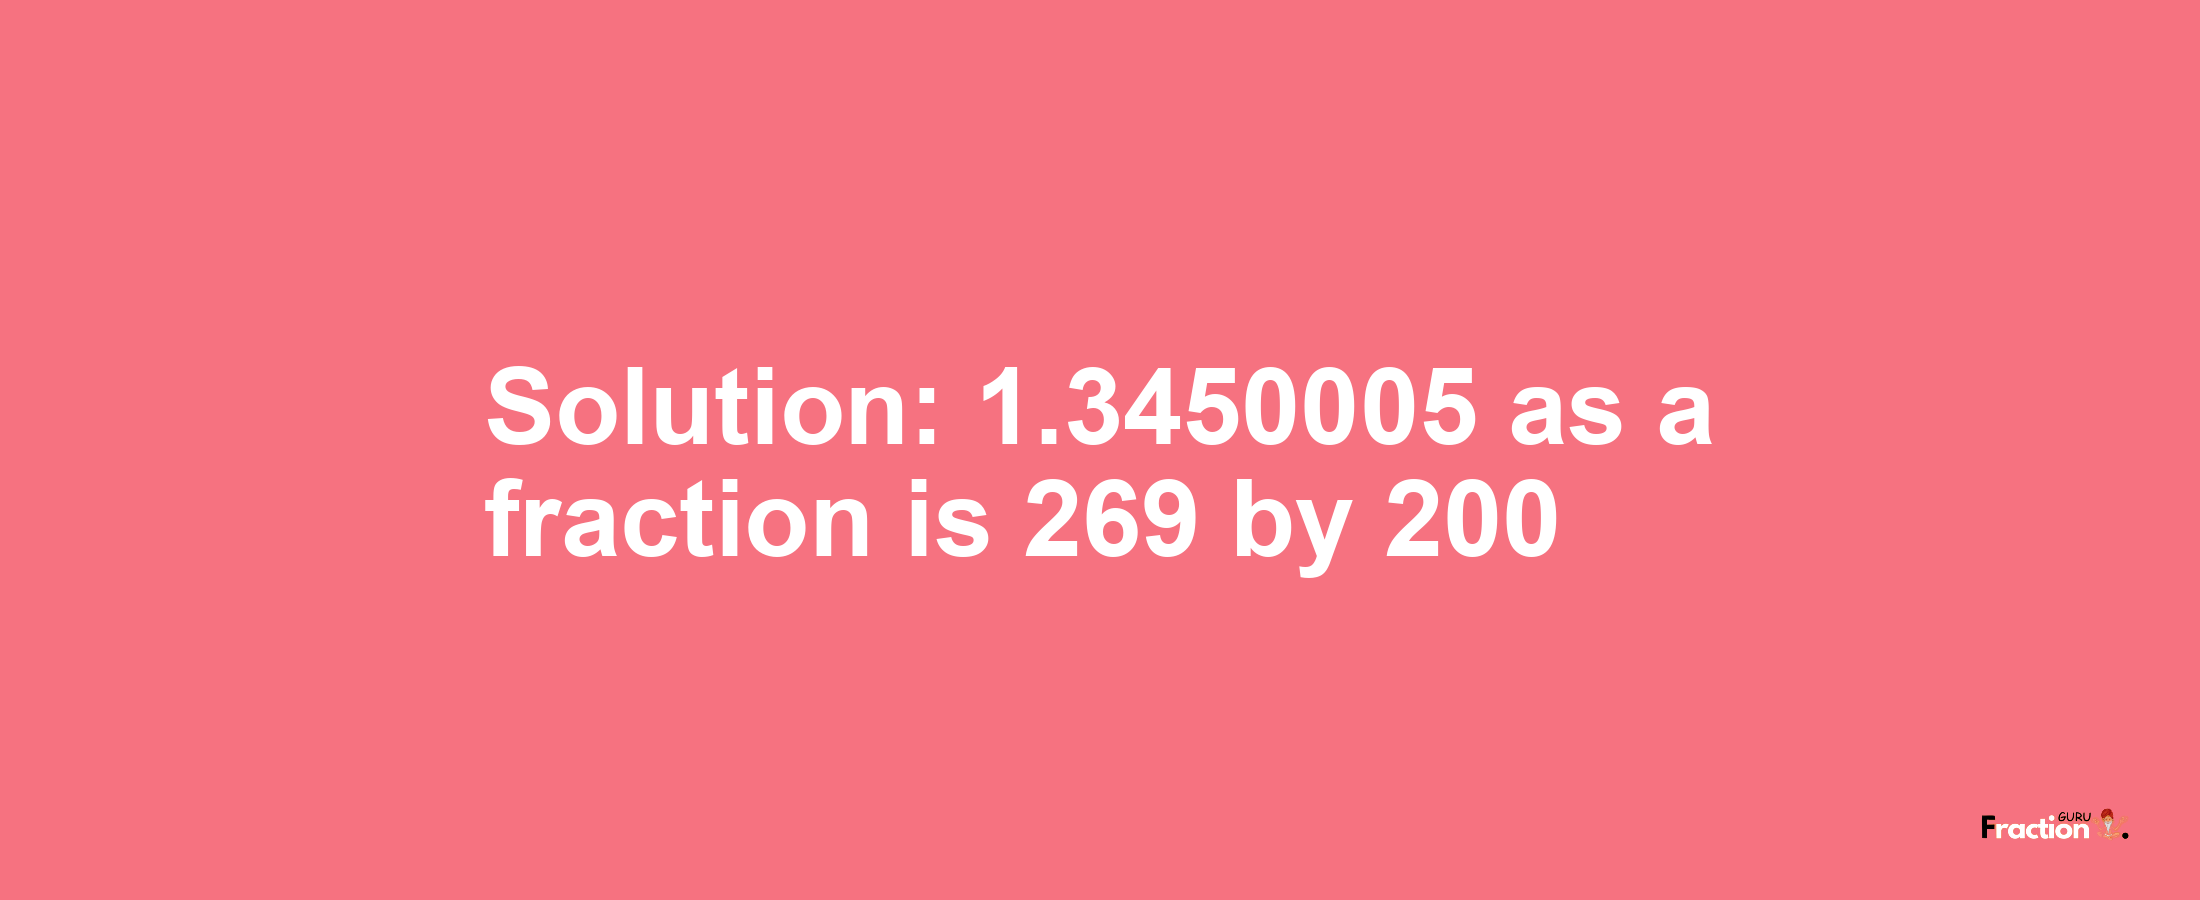 Solution:1.3450005 as a fraction is 269/200